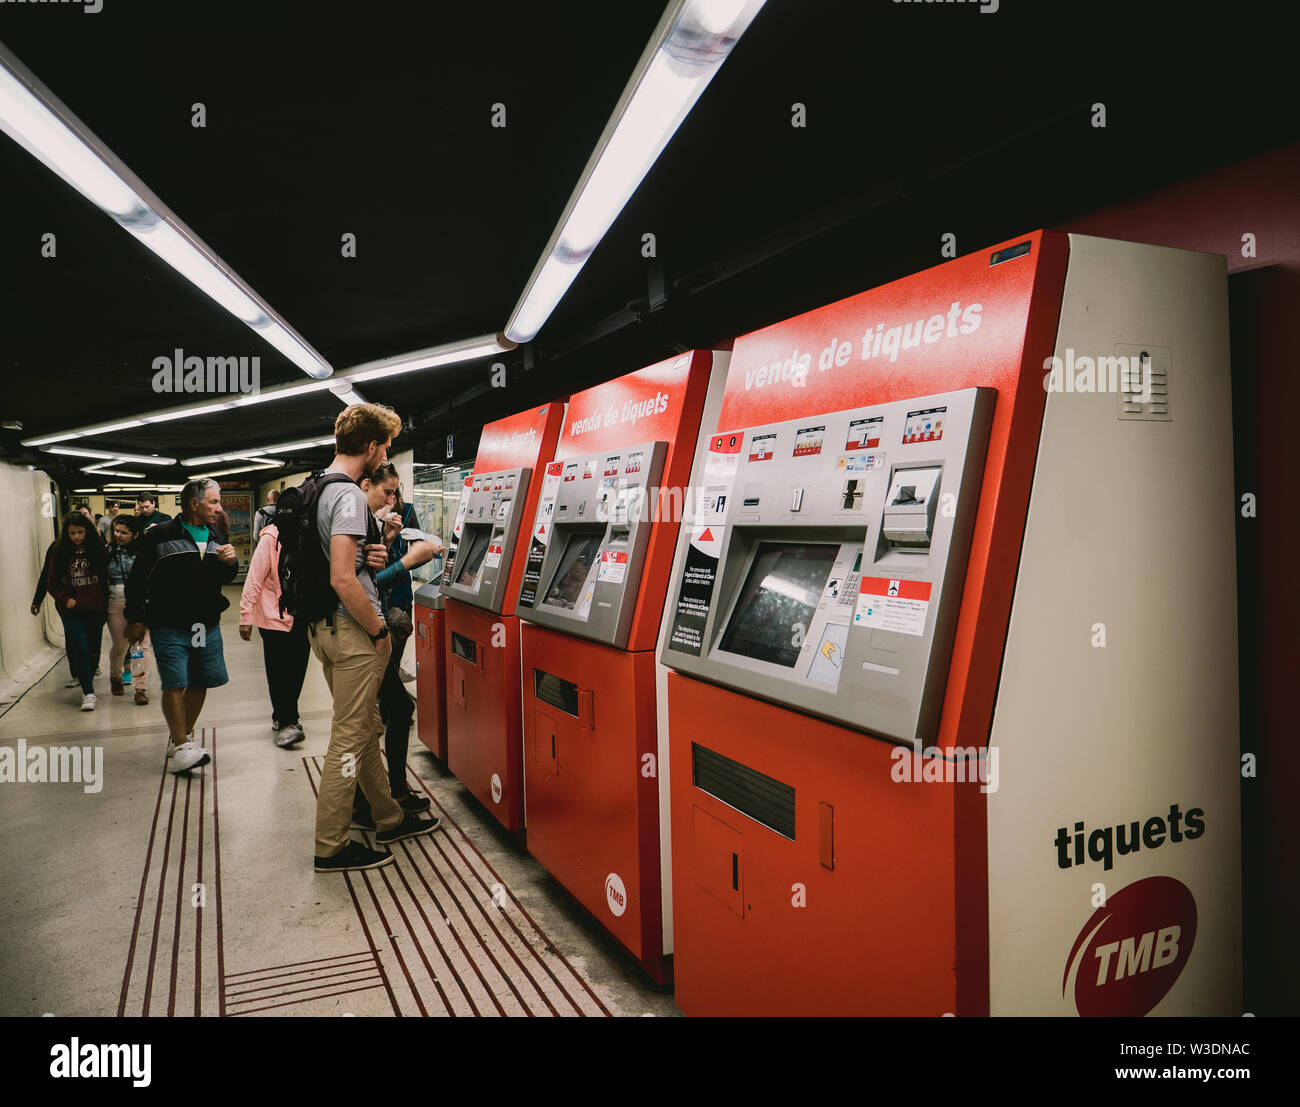 Lisbon, Spain - Jun 3, 2018: People buying subway underground tickets at  the vending machines inside Barcelona metro station TMB tiquets Stock Photo  - Alamy